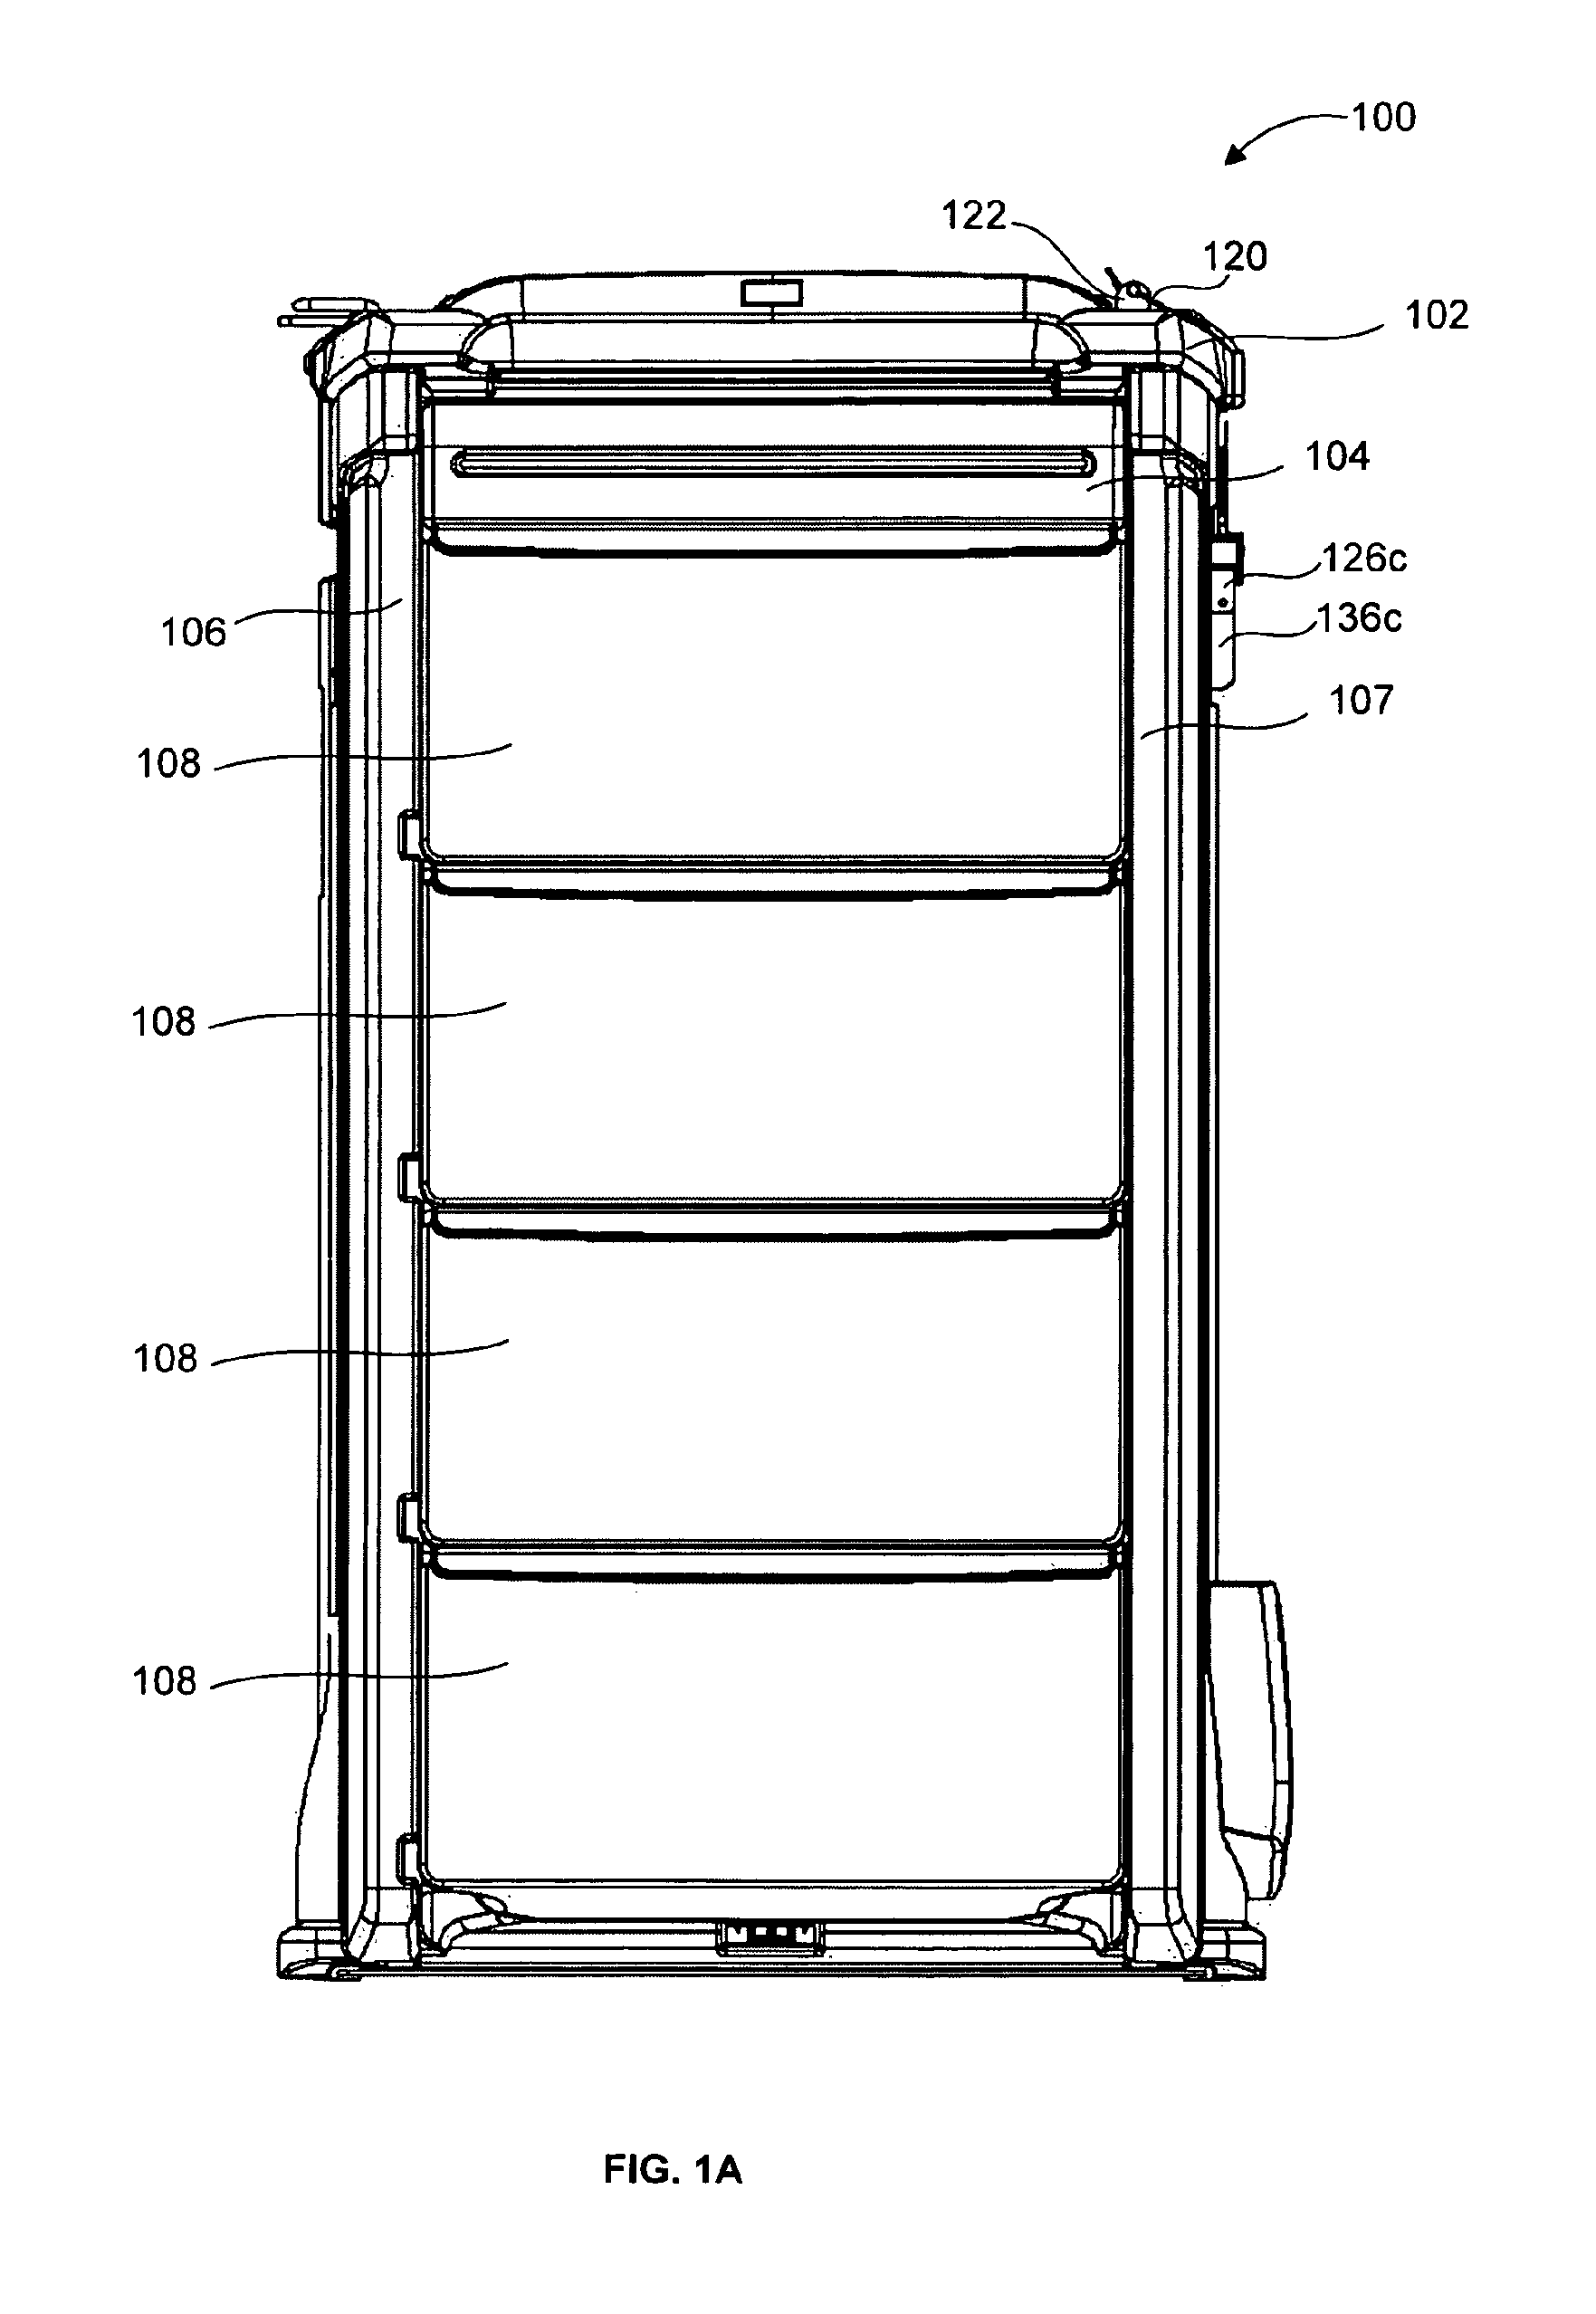 Sealing structure for sealing multiple sections and a drawer of a medical emergency cart